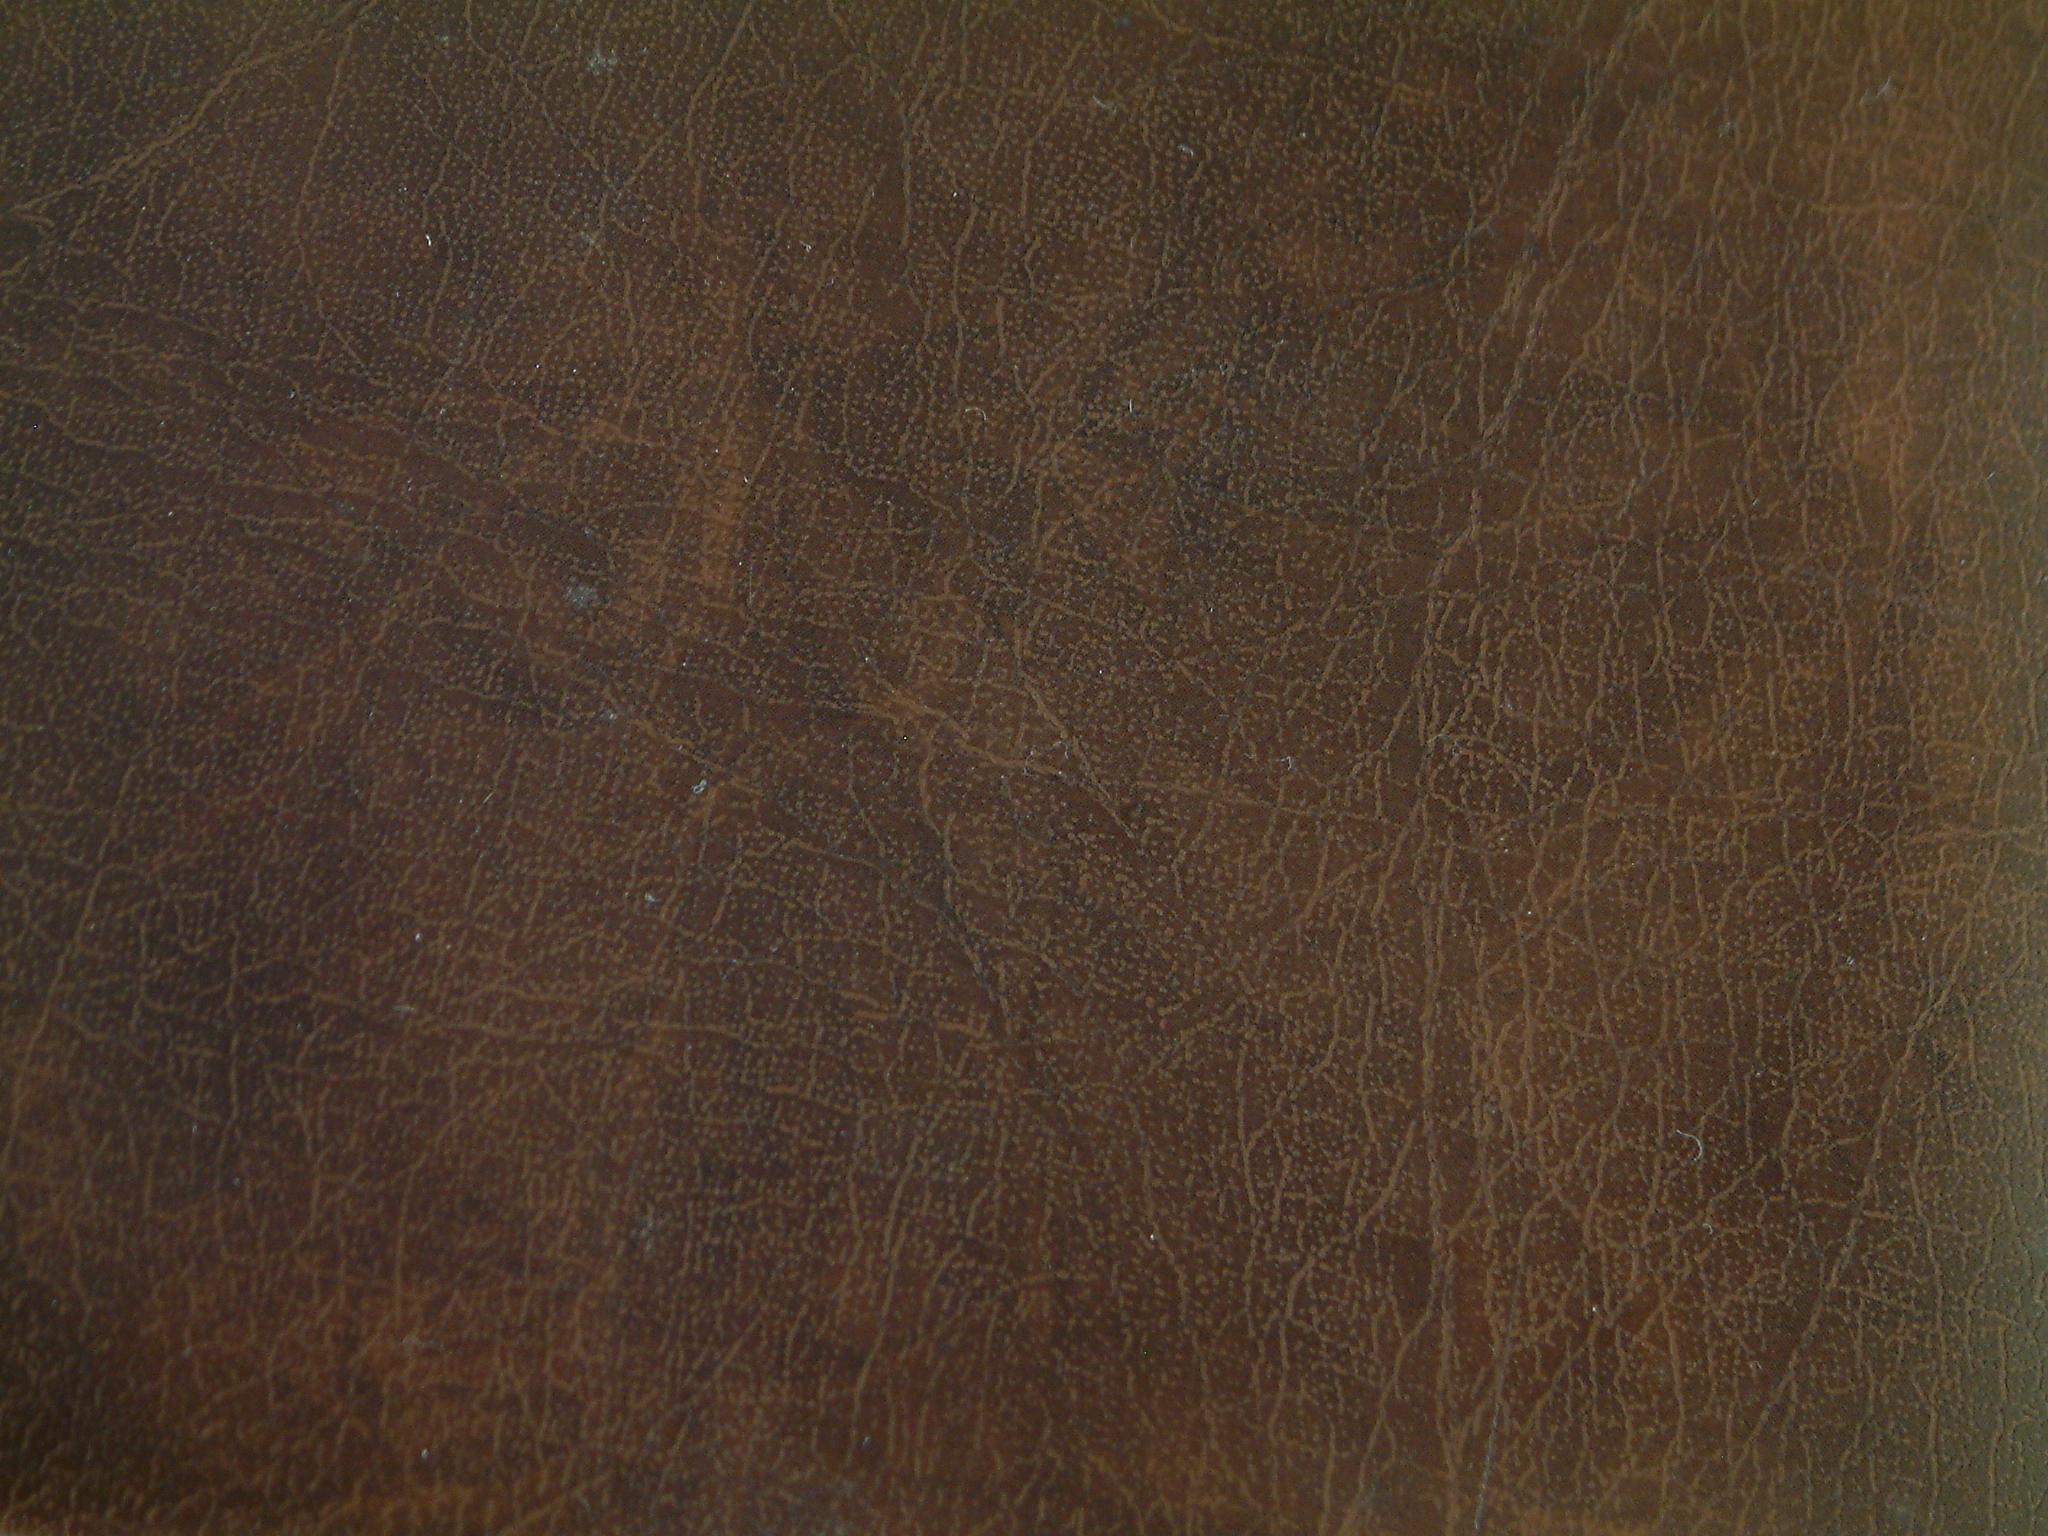 Leather Textures Wallpaper 2048x1536 Leather Textures Texture